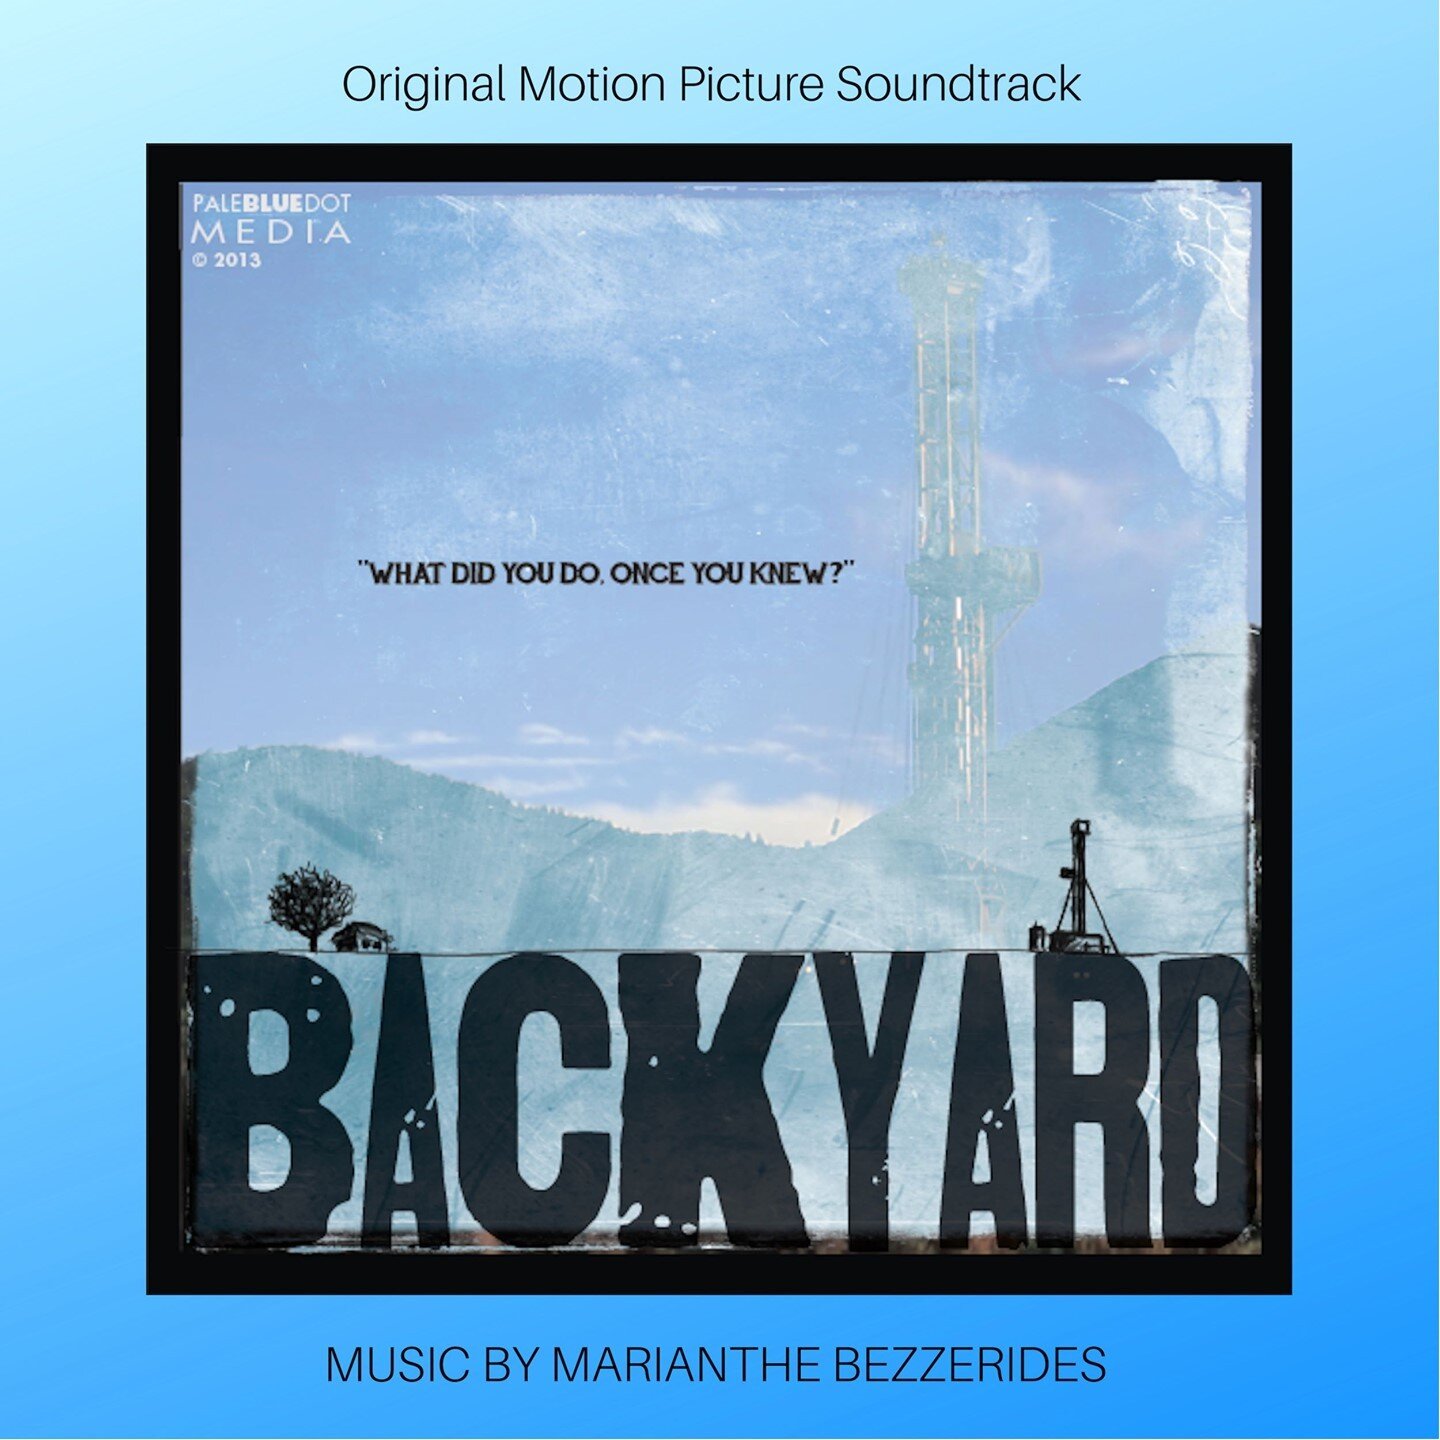 It's taken a while, but I'm re-releasing all of my film and documentary scores.  Here's a preview of one of my favorite scores for Backyard, directed by Deia Schlosberg. ⠀
⠀
https://buff.ly/2DYwadd